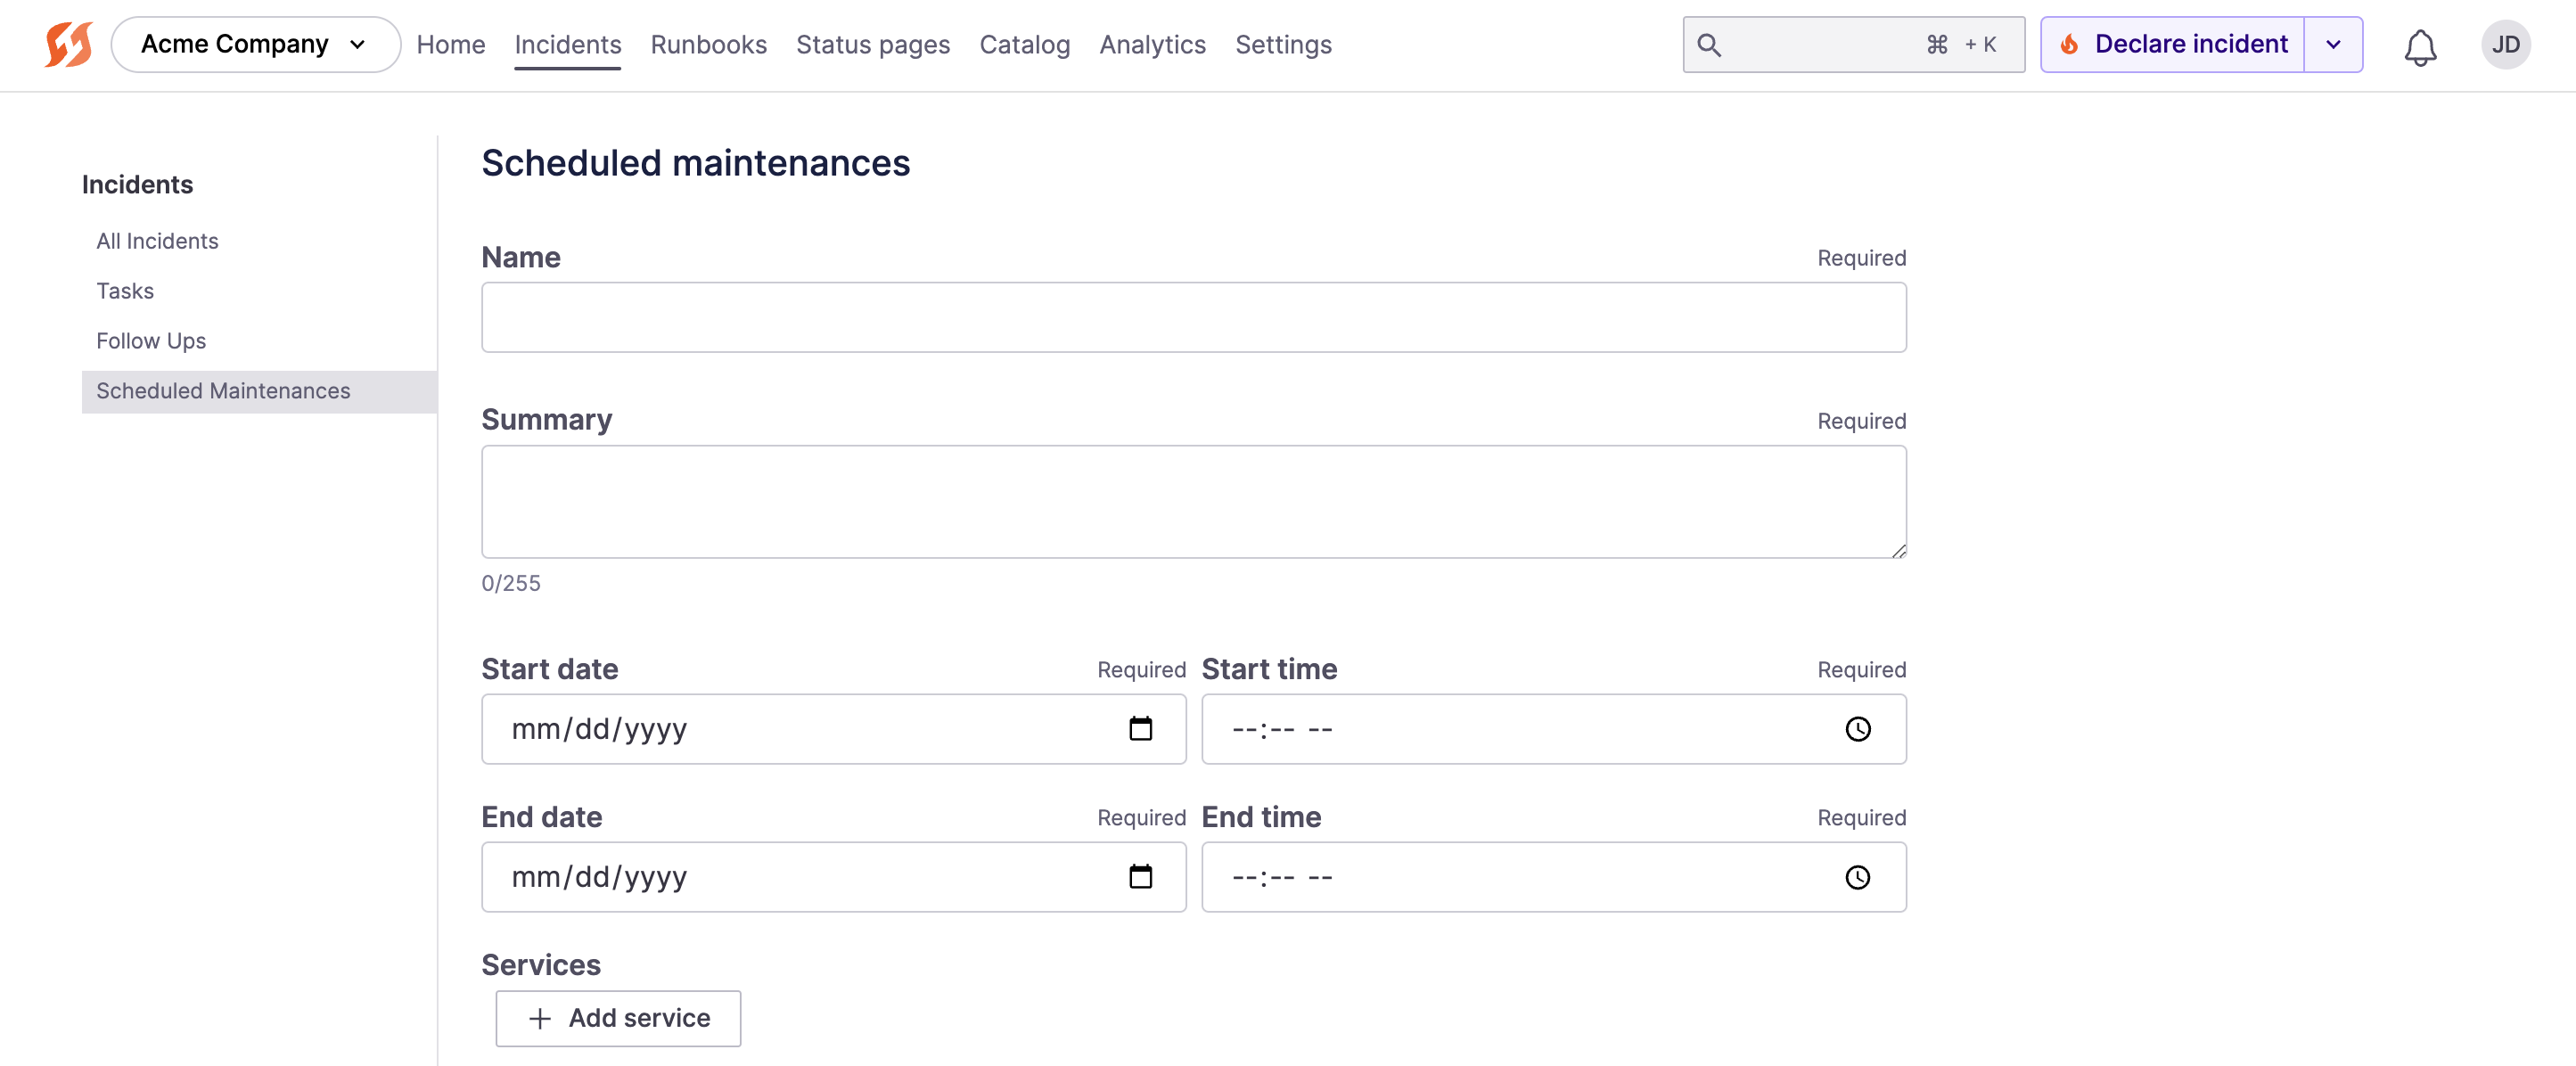 Scheduled Maintenance form in the web UI